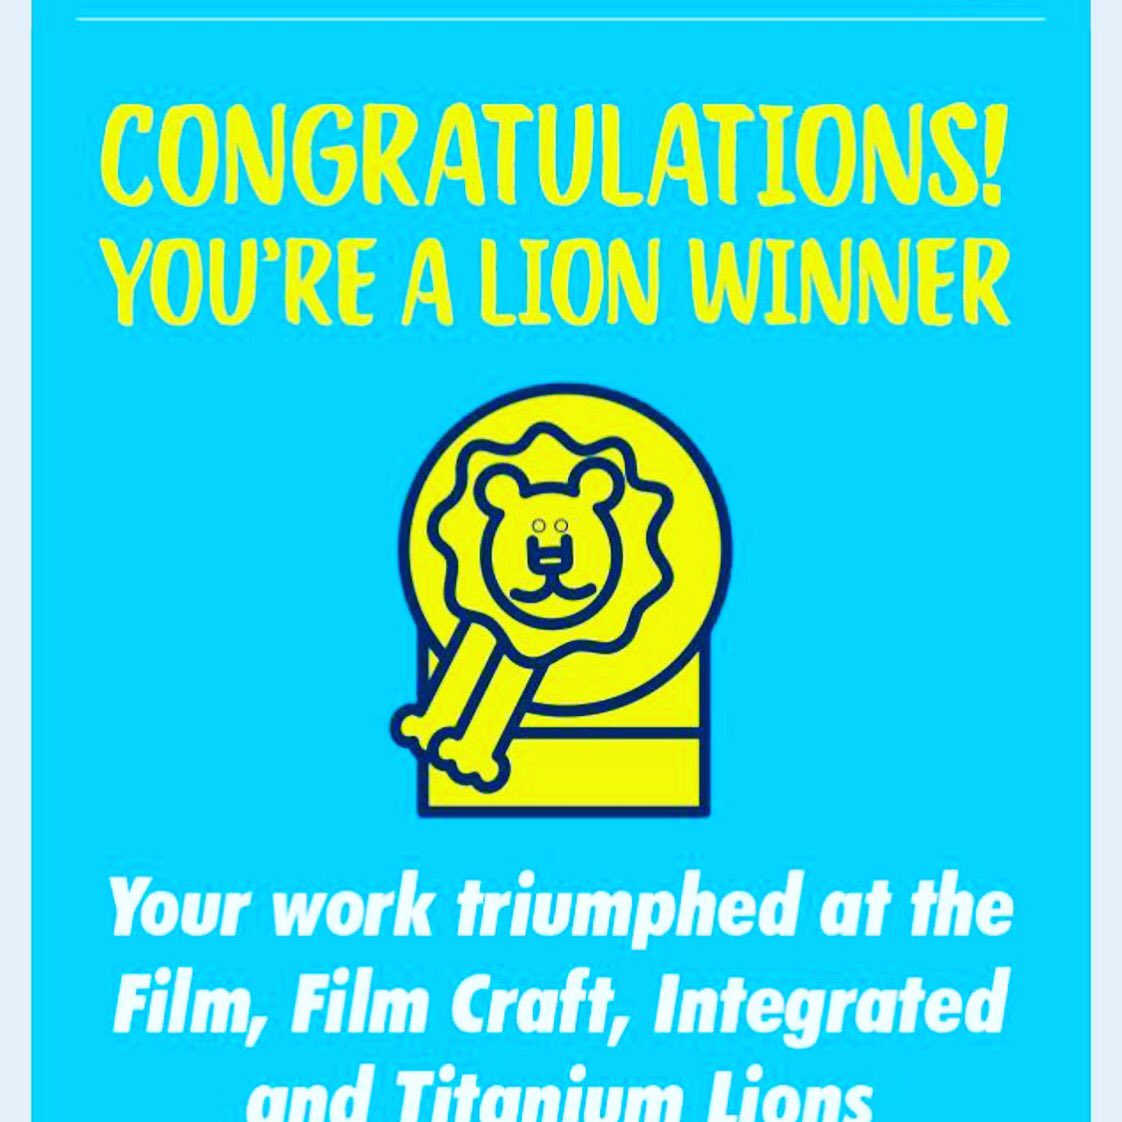 Proud to have won a Lion at Cannes! Thank you to all that made it possible! #canneslions2016 #cyberbullyinghurts